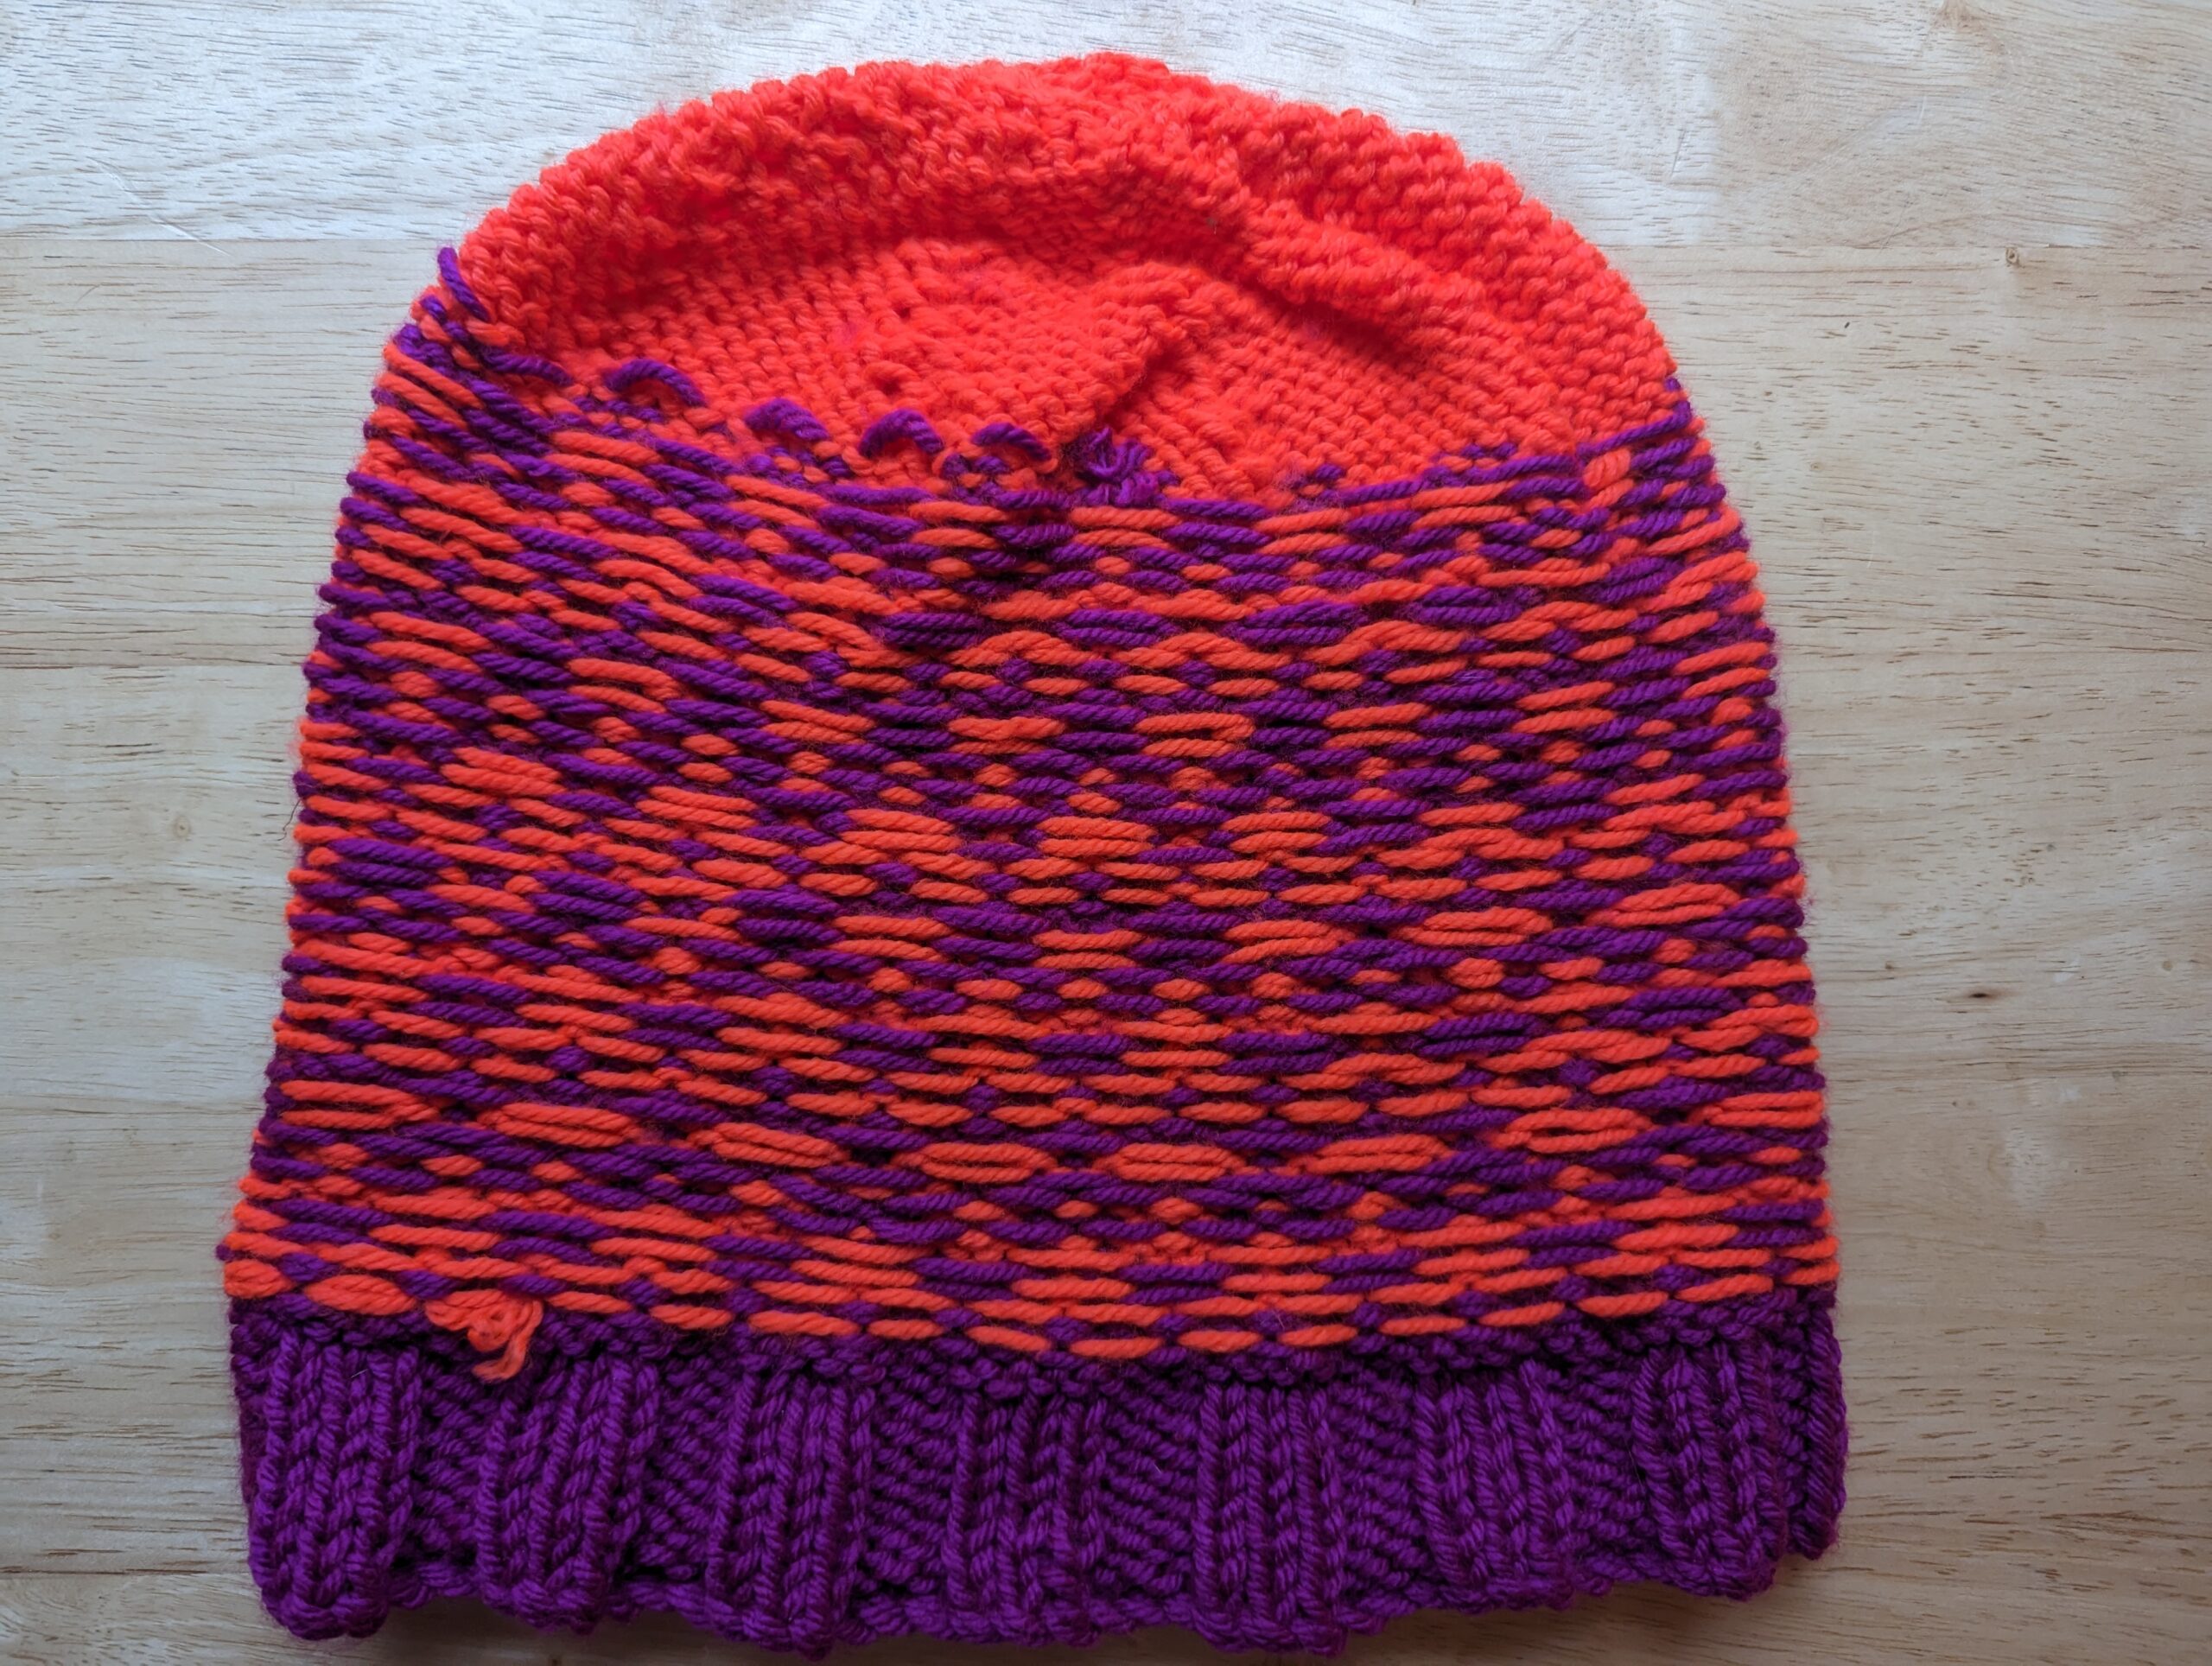 The inside of a colorwork hat in violet and neon orange with a diamond pattern showing very clean floats. The rim is violet and the crown is orange.